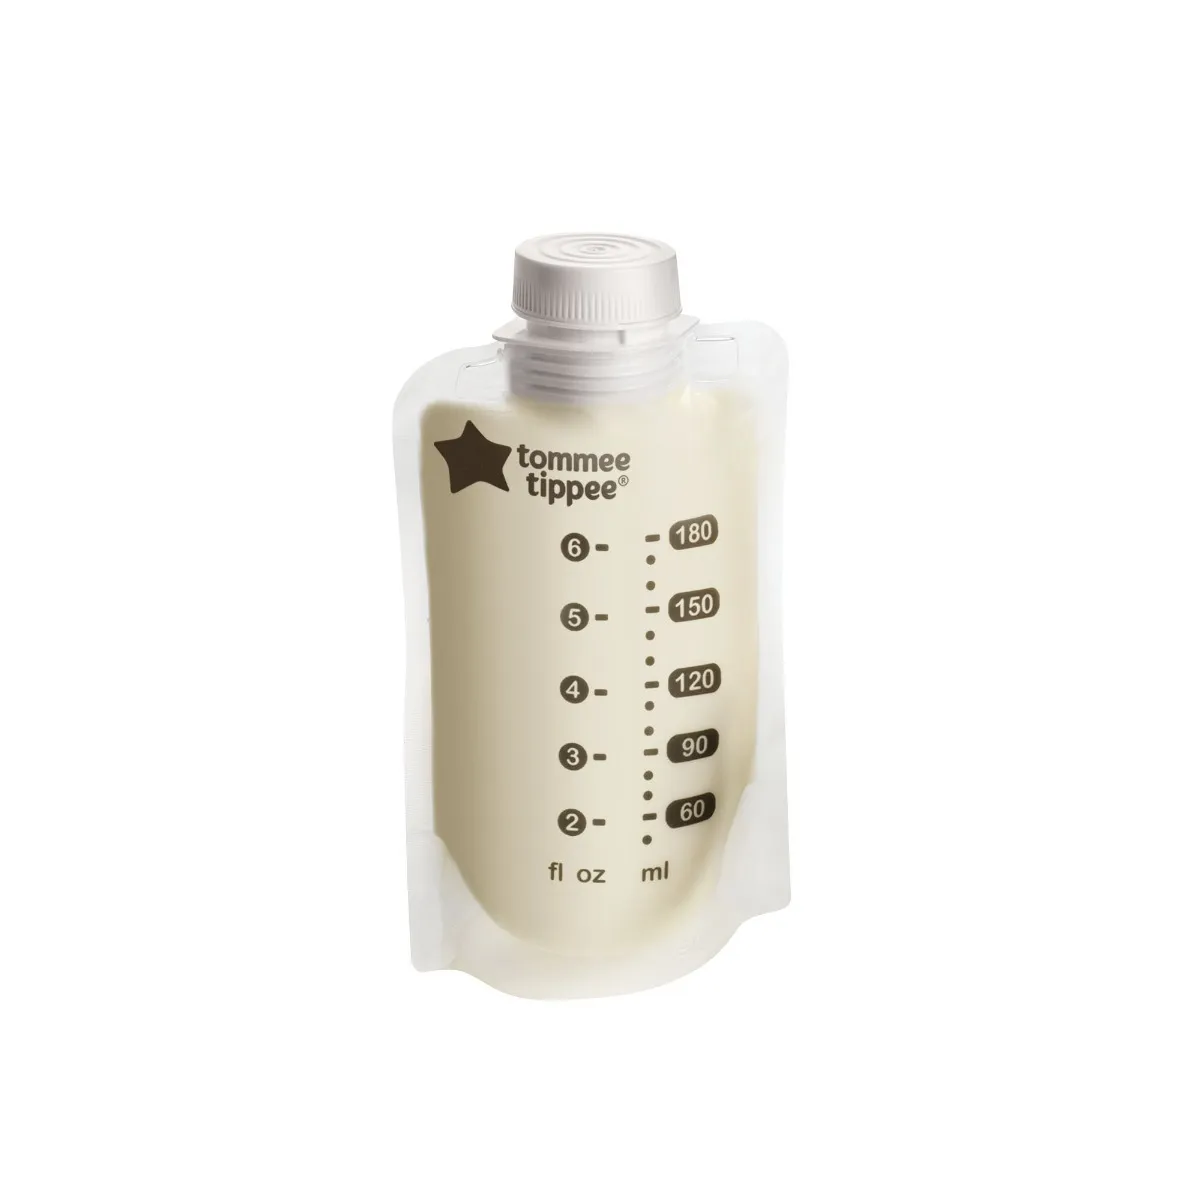 Tommee Tippee products for sale